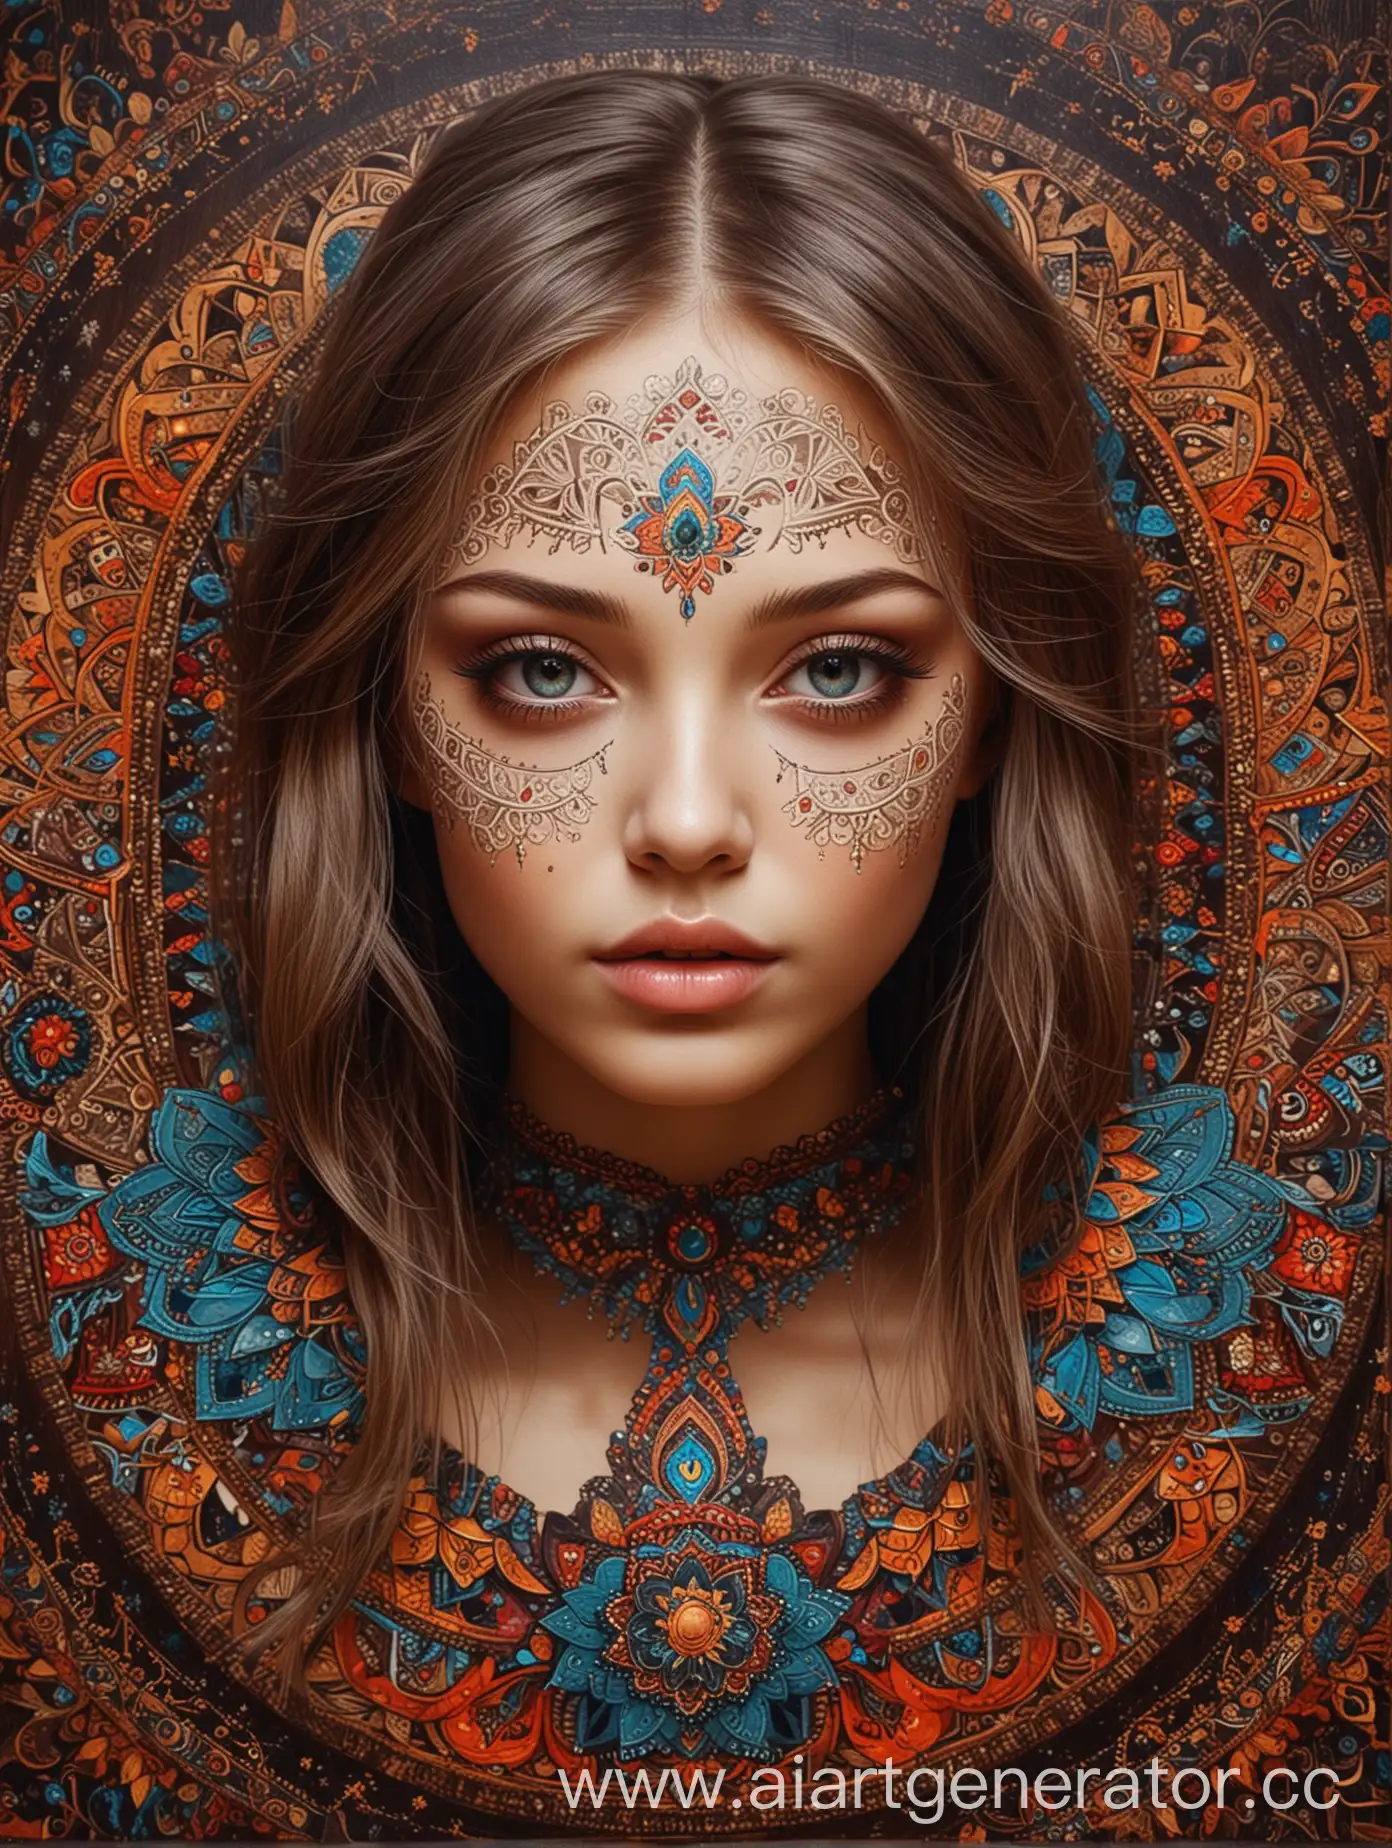 Mysterious-Slavic-Girl-Mandalas-and-Wooden-Puzzles-Portrait